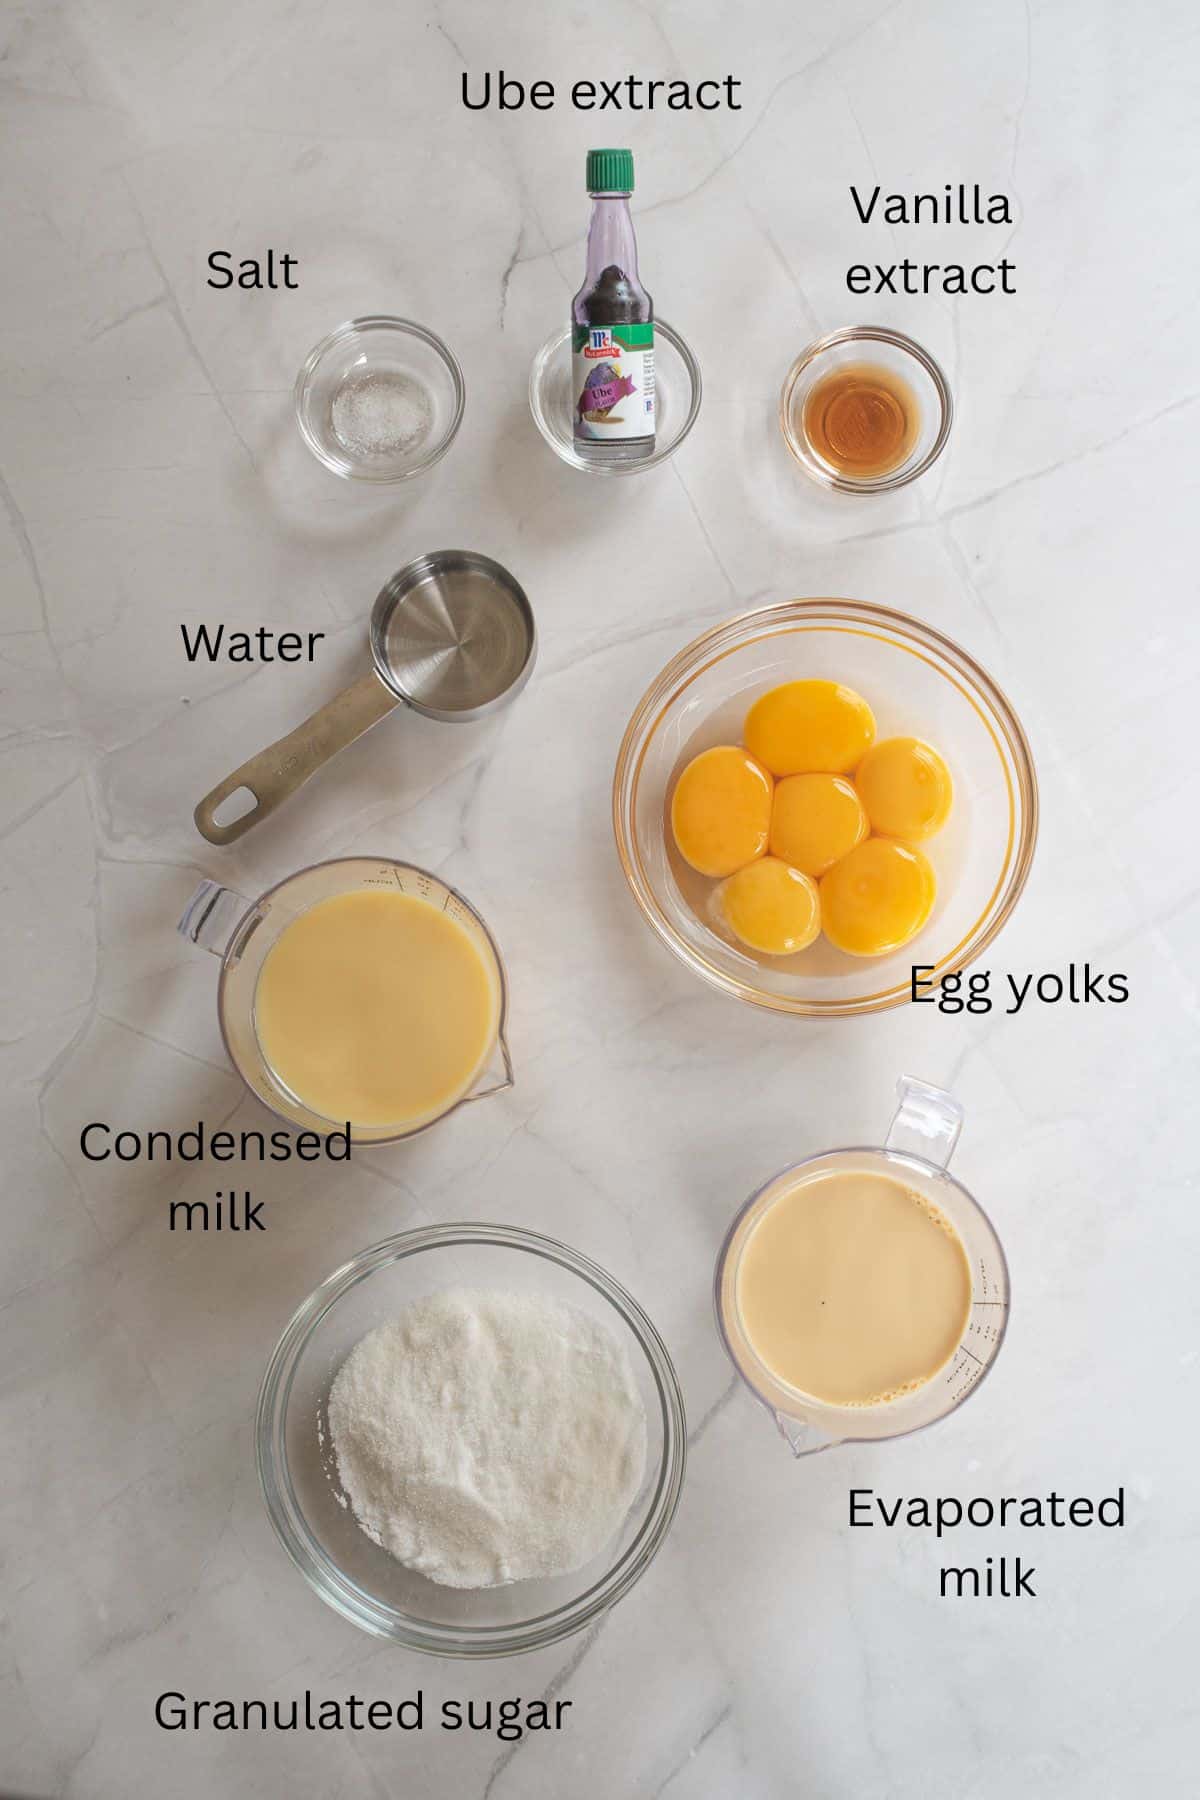 Egg yolks, condensed milk, evaporated milk, vanilla extract, ube extract, sugar, salt and water against a marble background.